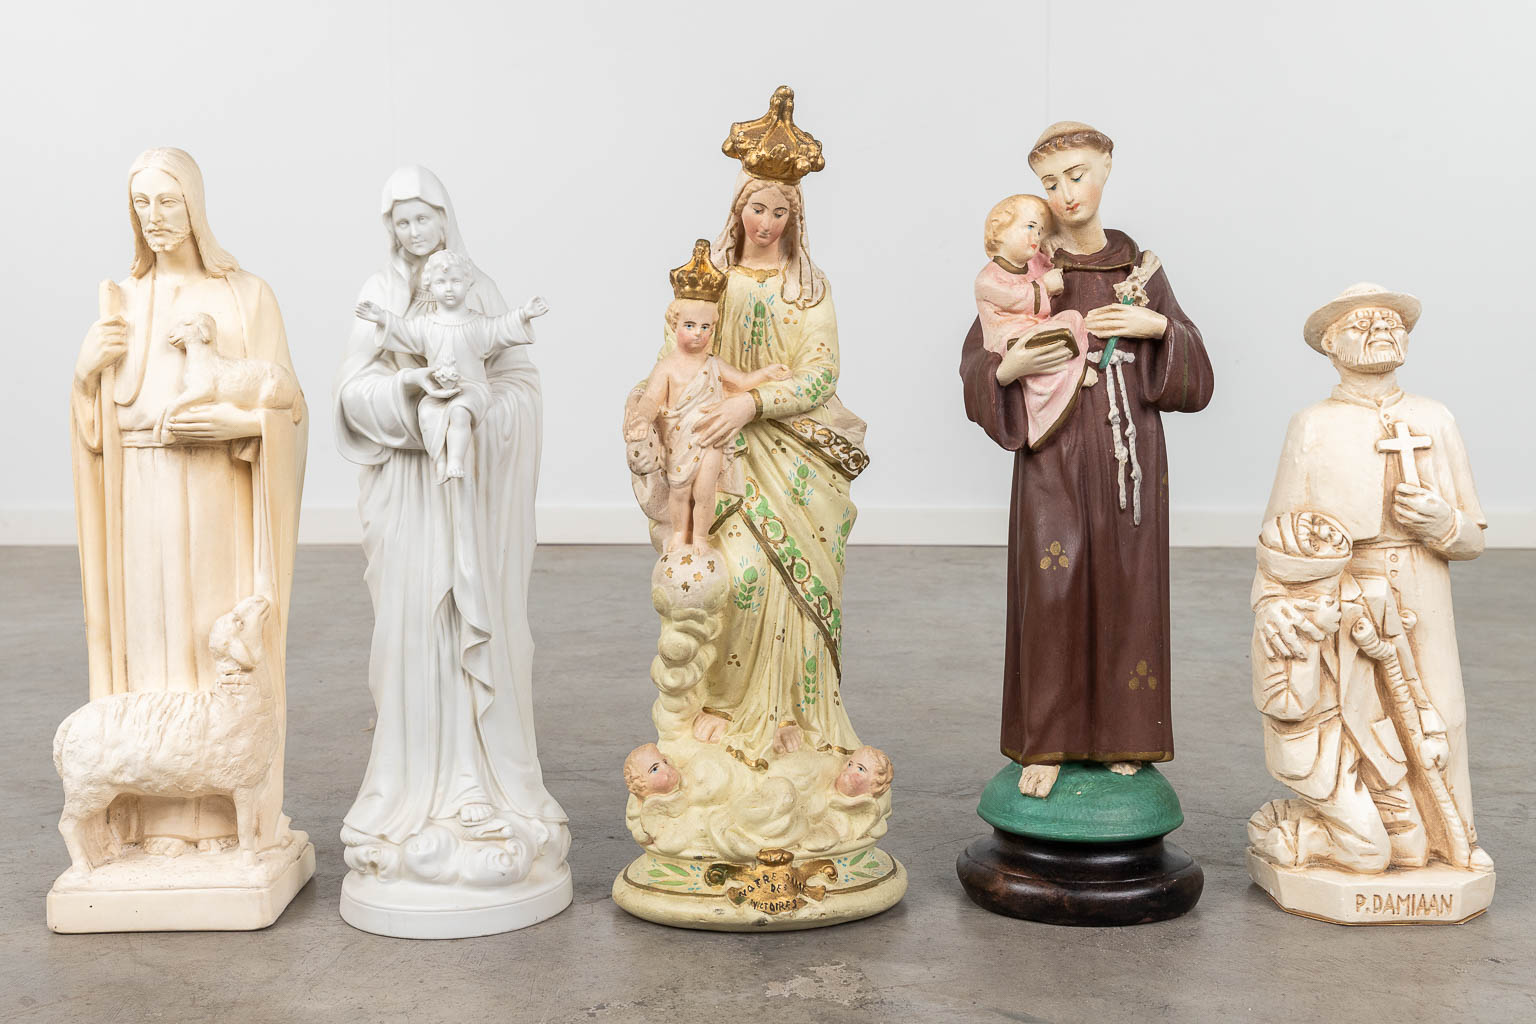 A collection of 11 holy figurines, porcelain, plaster. (H: 46 cm)